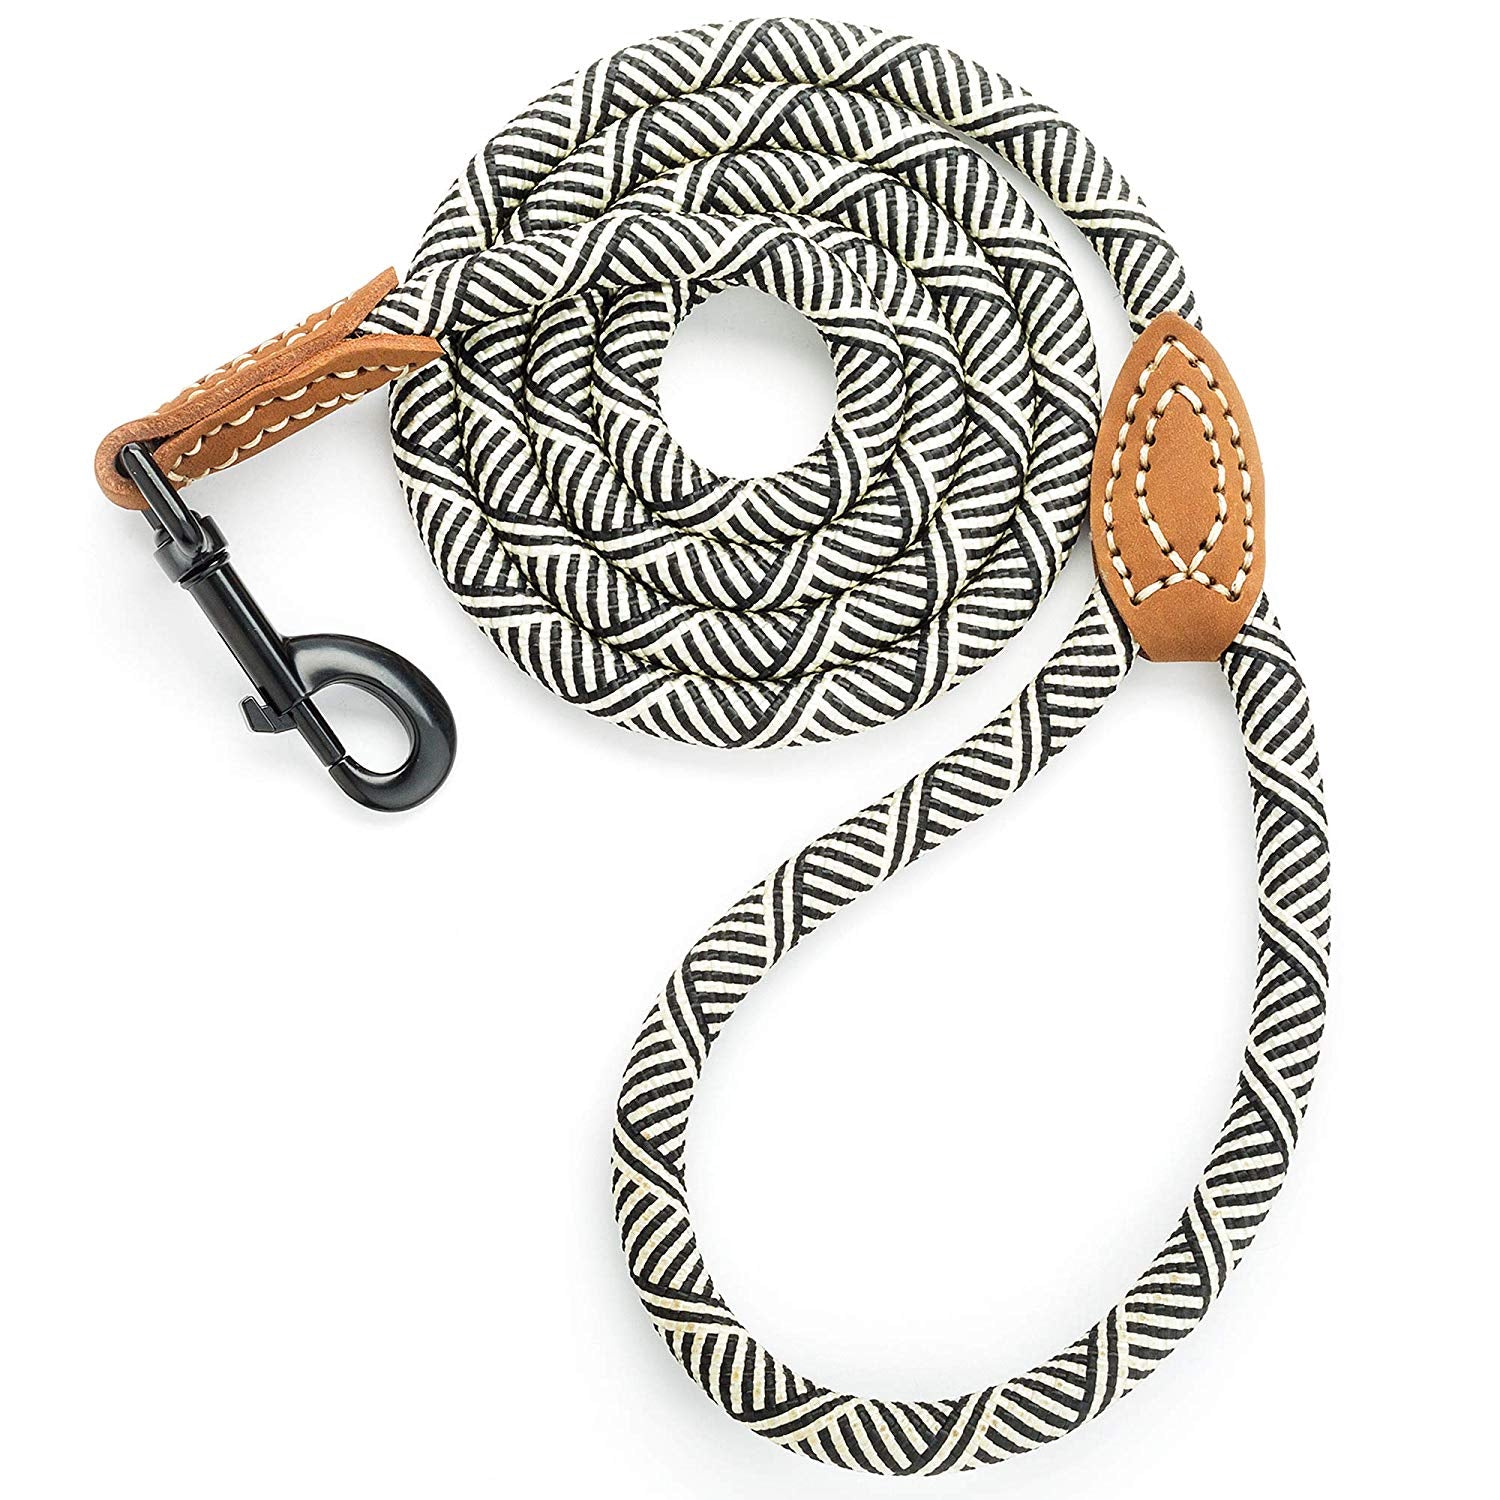 Mountain Climbing Dog Rope Leash with Metal Sturdy Clasp | Genuine Leather Tailored Connection with Strong Stitches